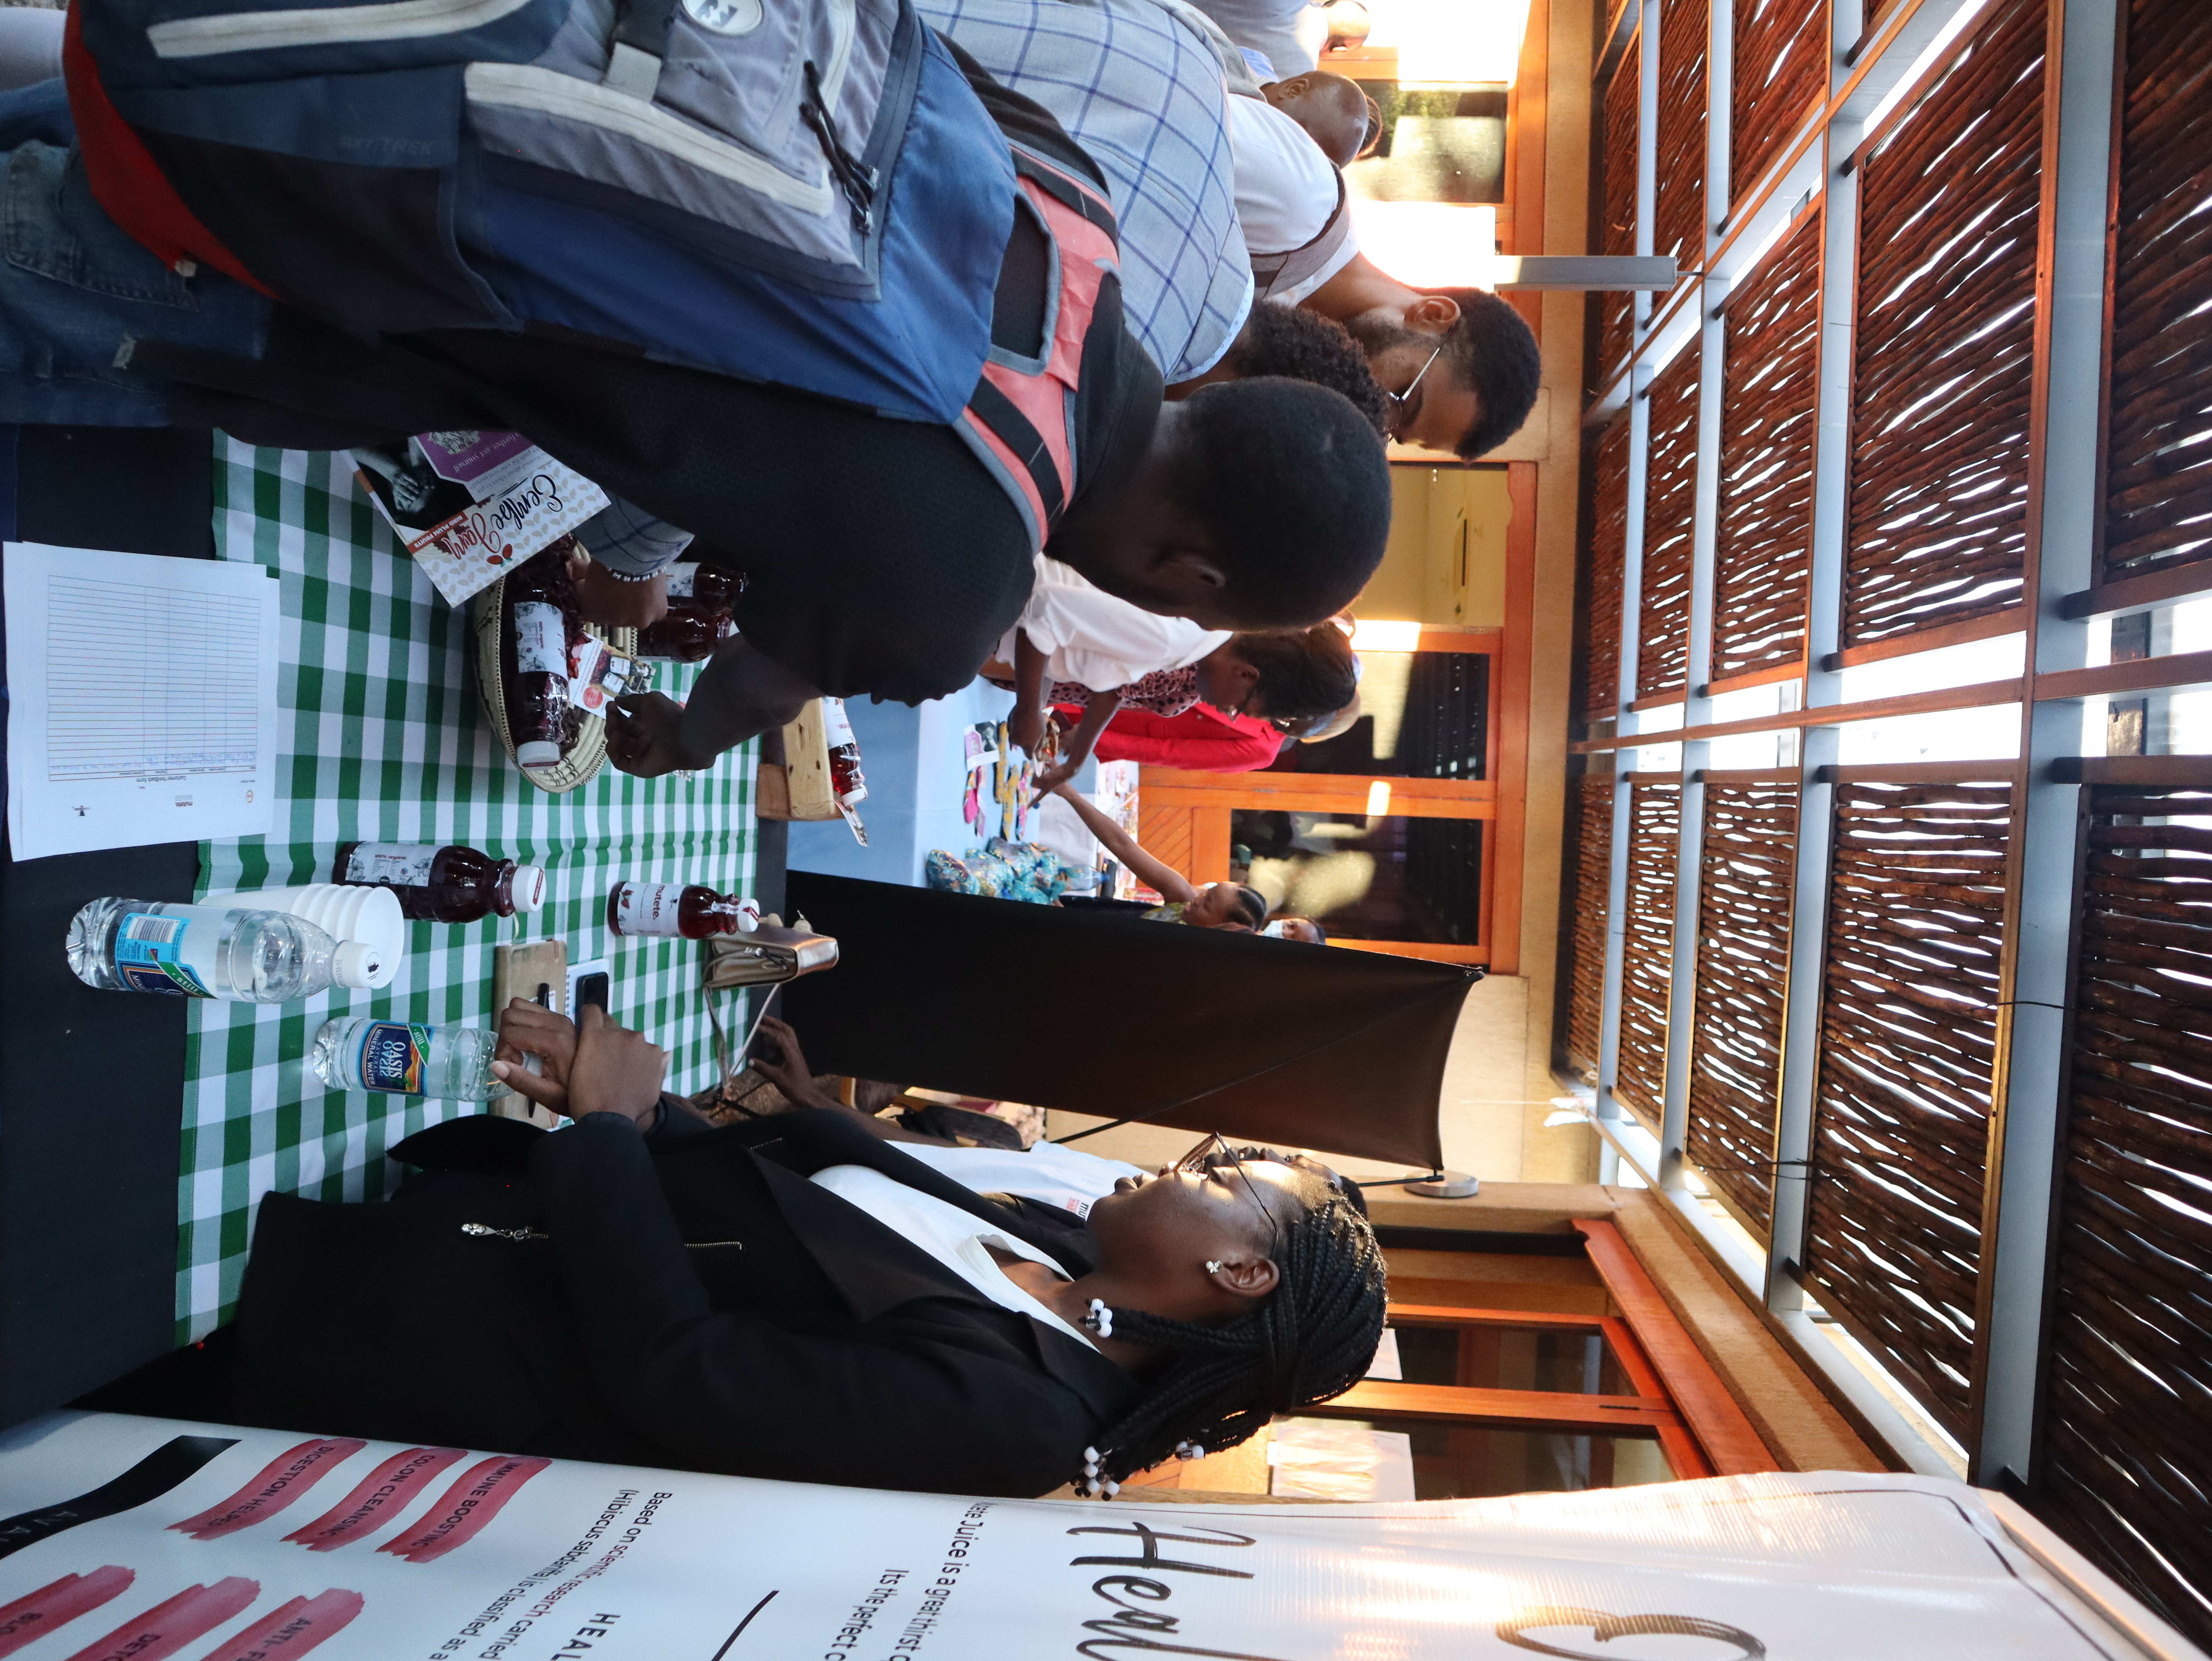 Guests sampling the products showcased by entrepreneurs at the SEEE Symposium.